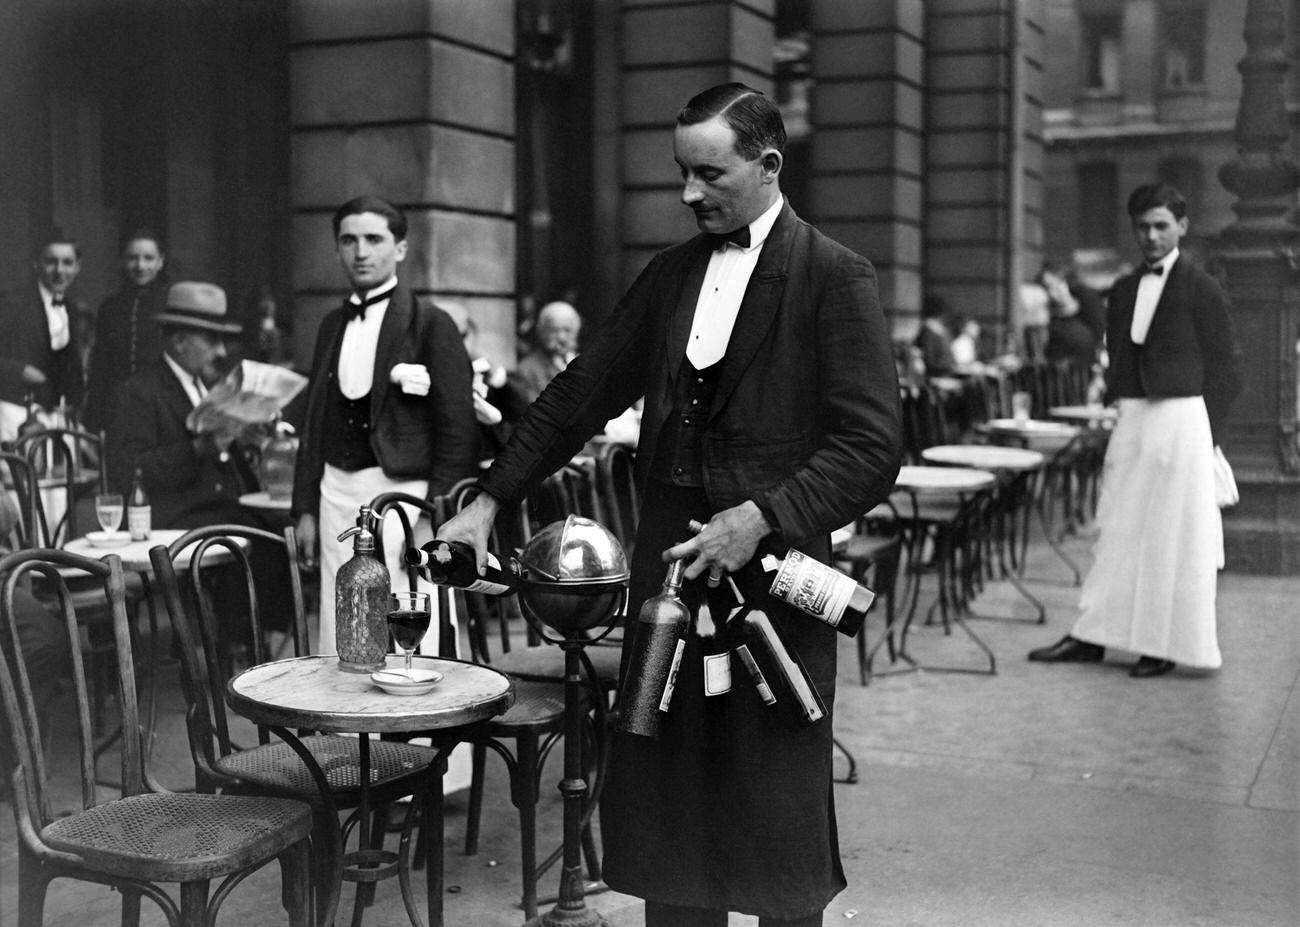 Parisian Waiters Serving Drinks at Cafe Terrace During Heatwave, 1928